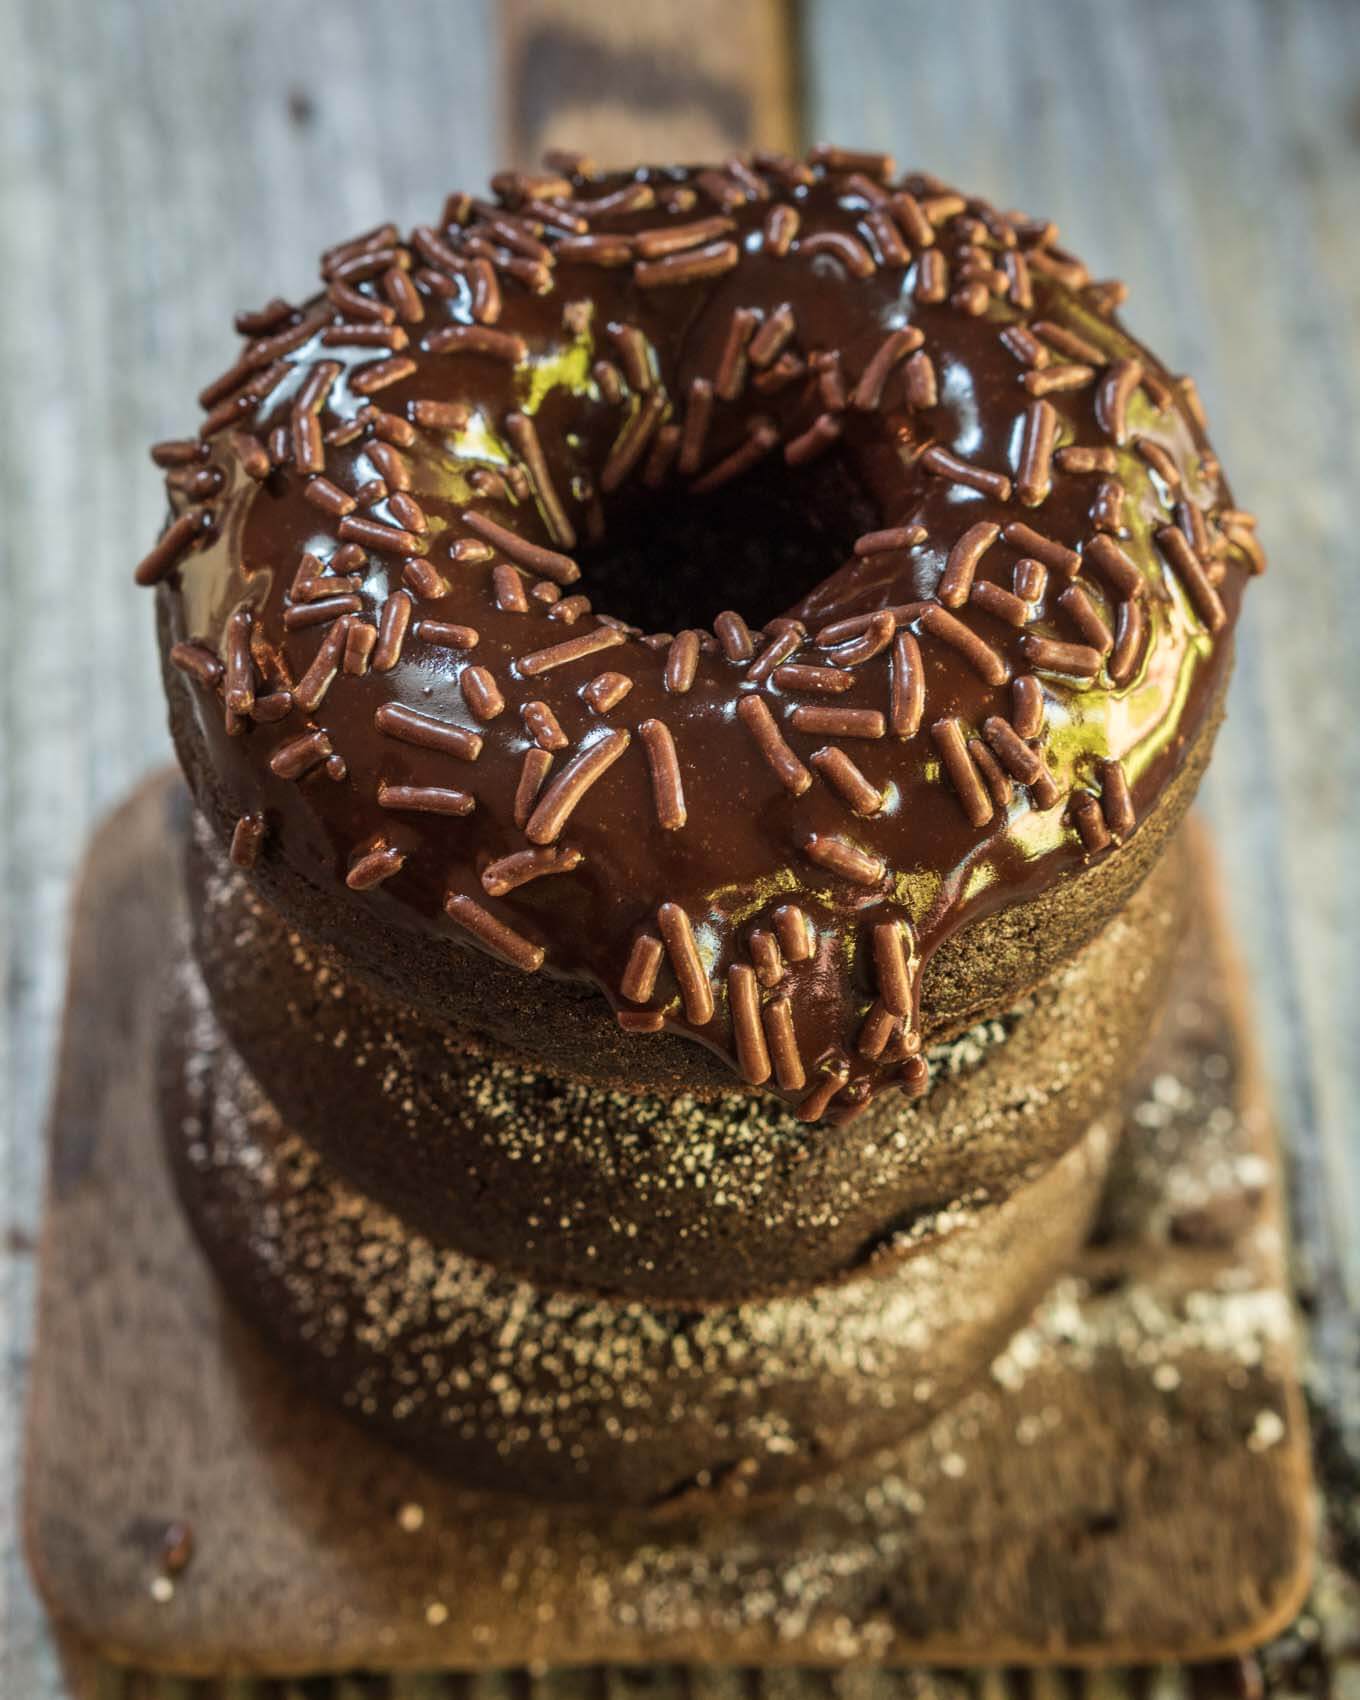 A stack of baked chocolate donuts sitting on an antique butter paddle. The top donut is glazed with chocolate and sprinkled with chocolate sprinkles.